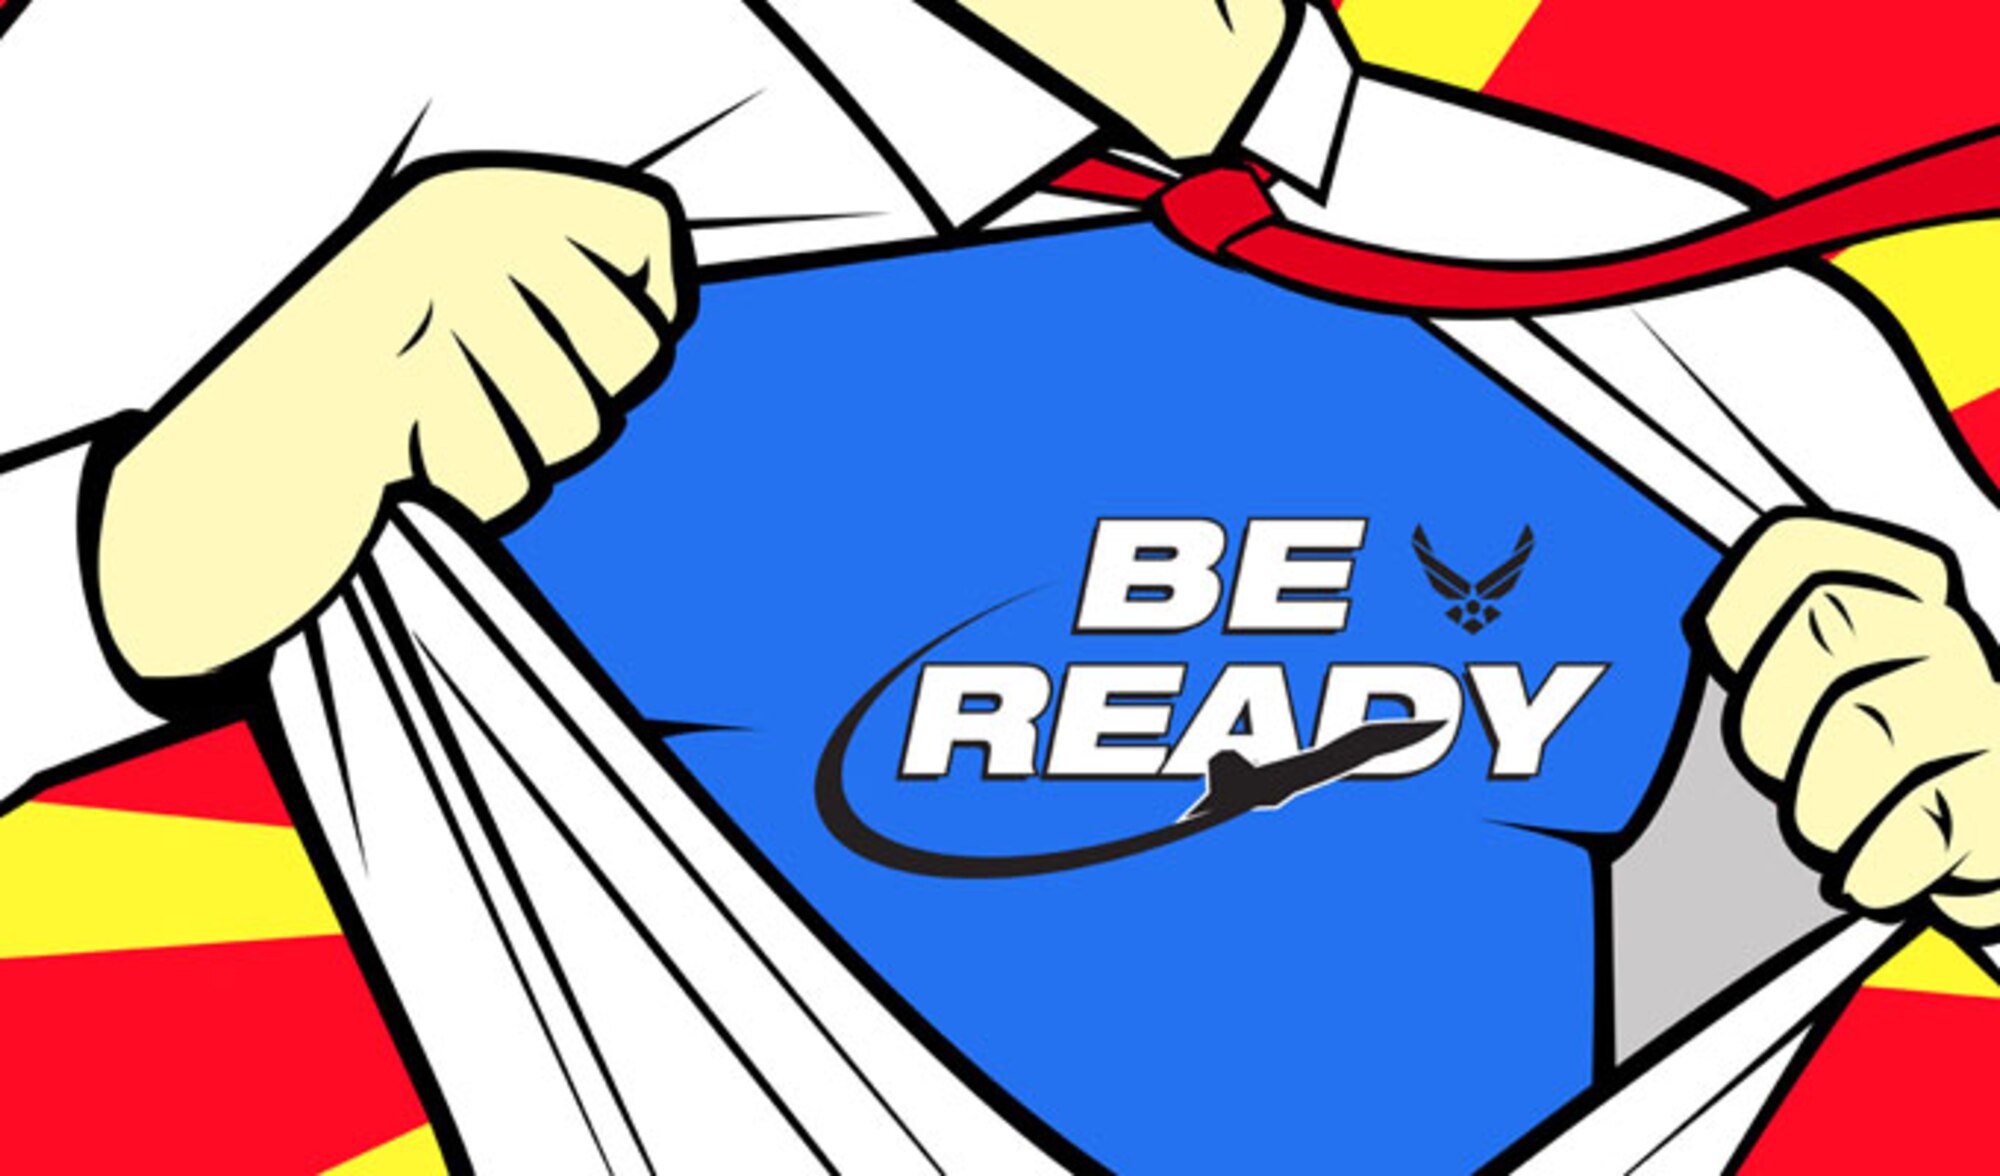 September is National Preparedness Month, an annual campaign to raise awareness on the importance of emergency preparedness. Through the “Be Ready” awareness campaign, Air Force Emergency Management provides information and practical resources to help Airmen and their families prepare for any natural or man-made disaster.